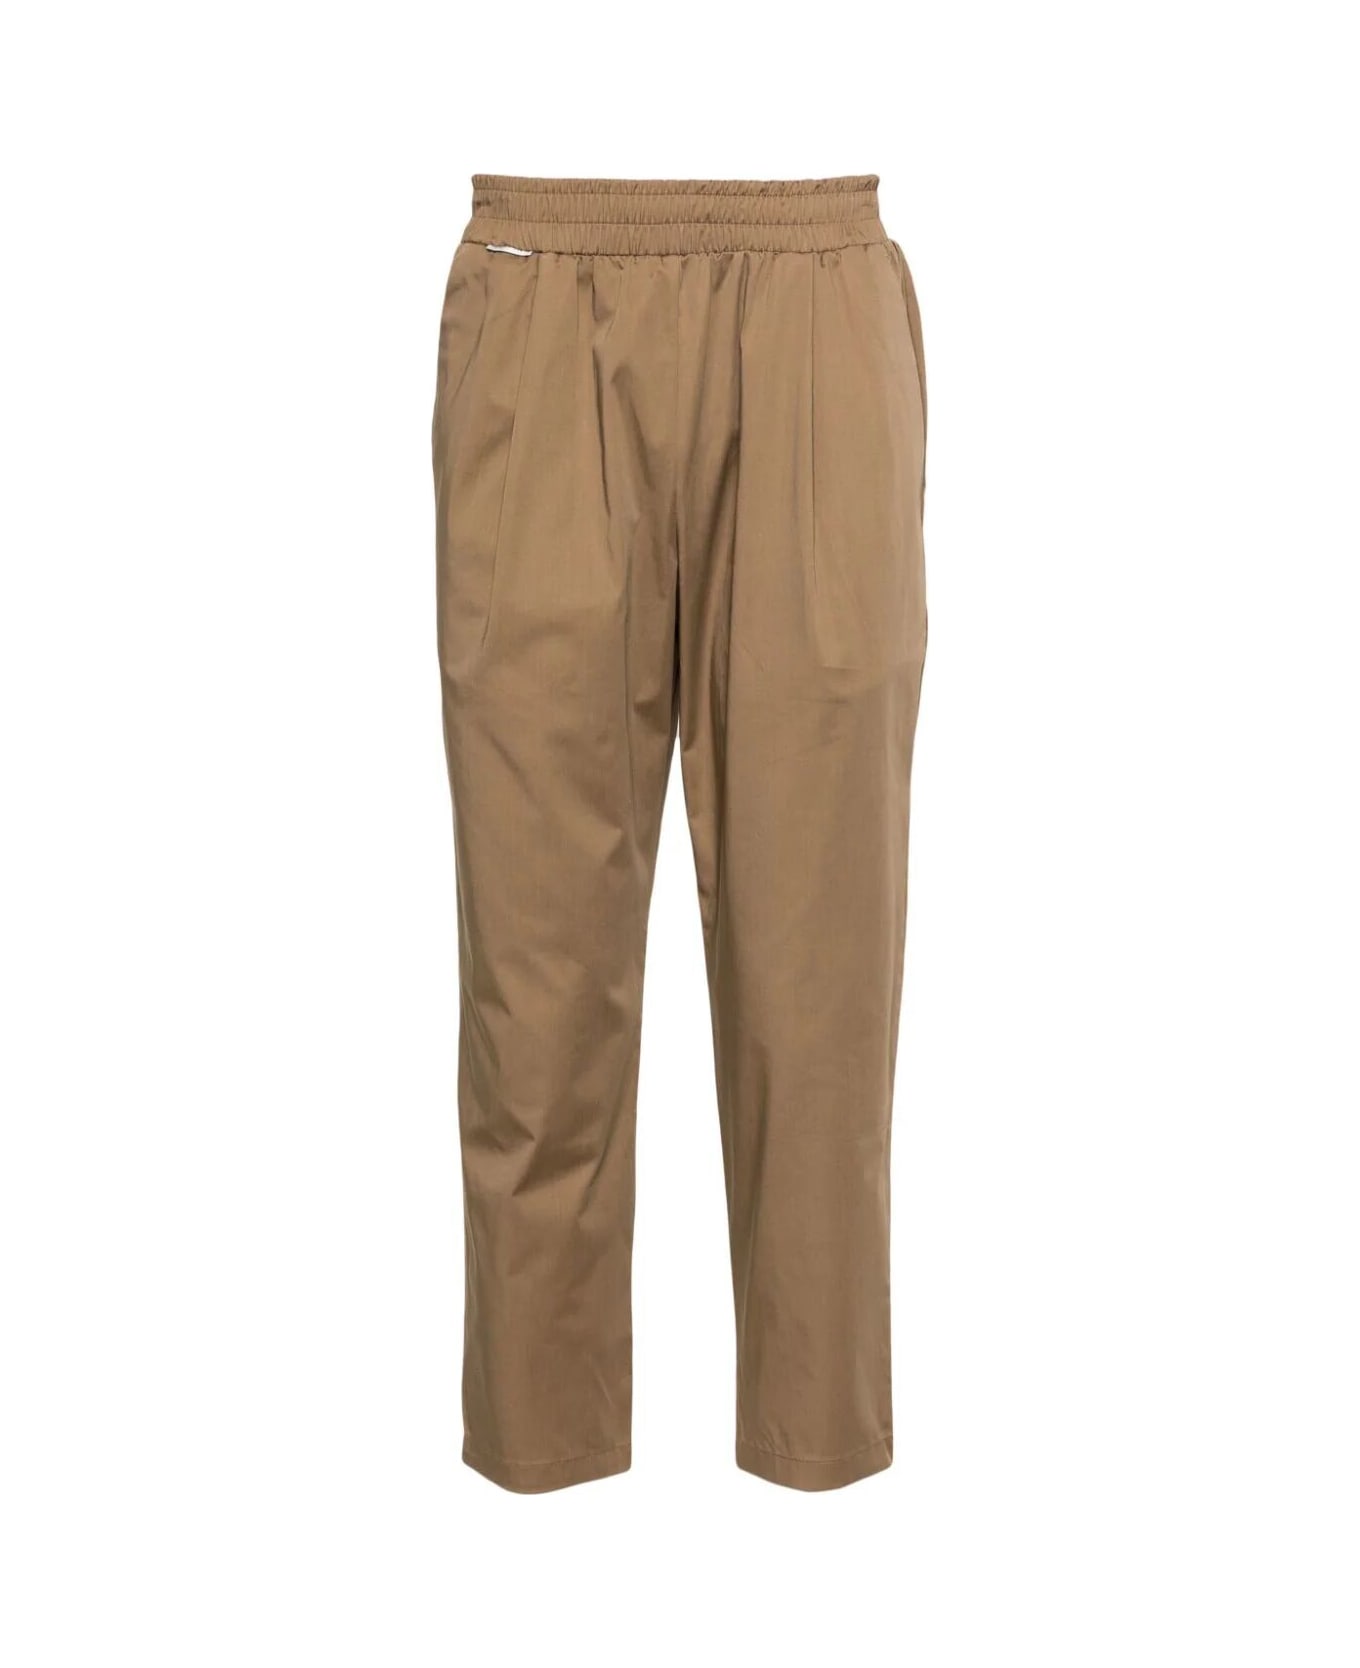 Family First Milano Chino Pants - Beige ボトムス